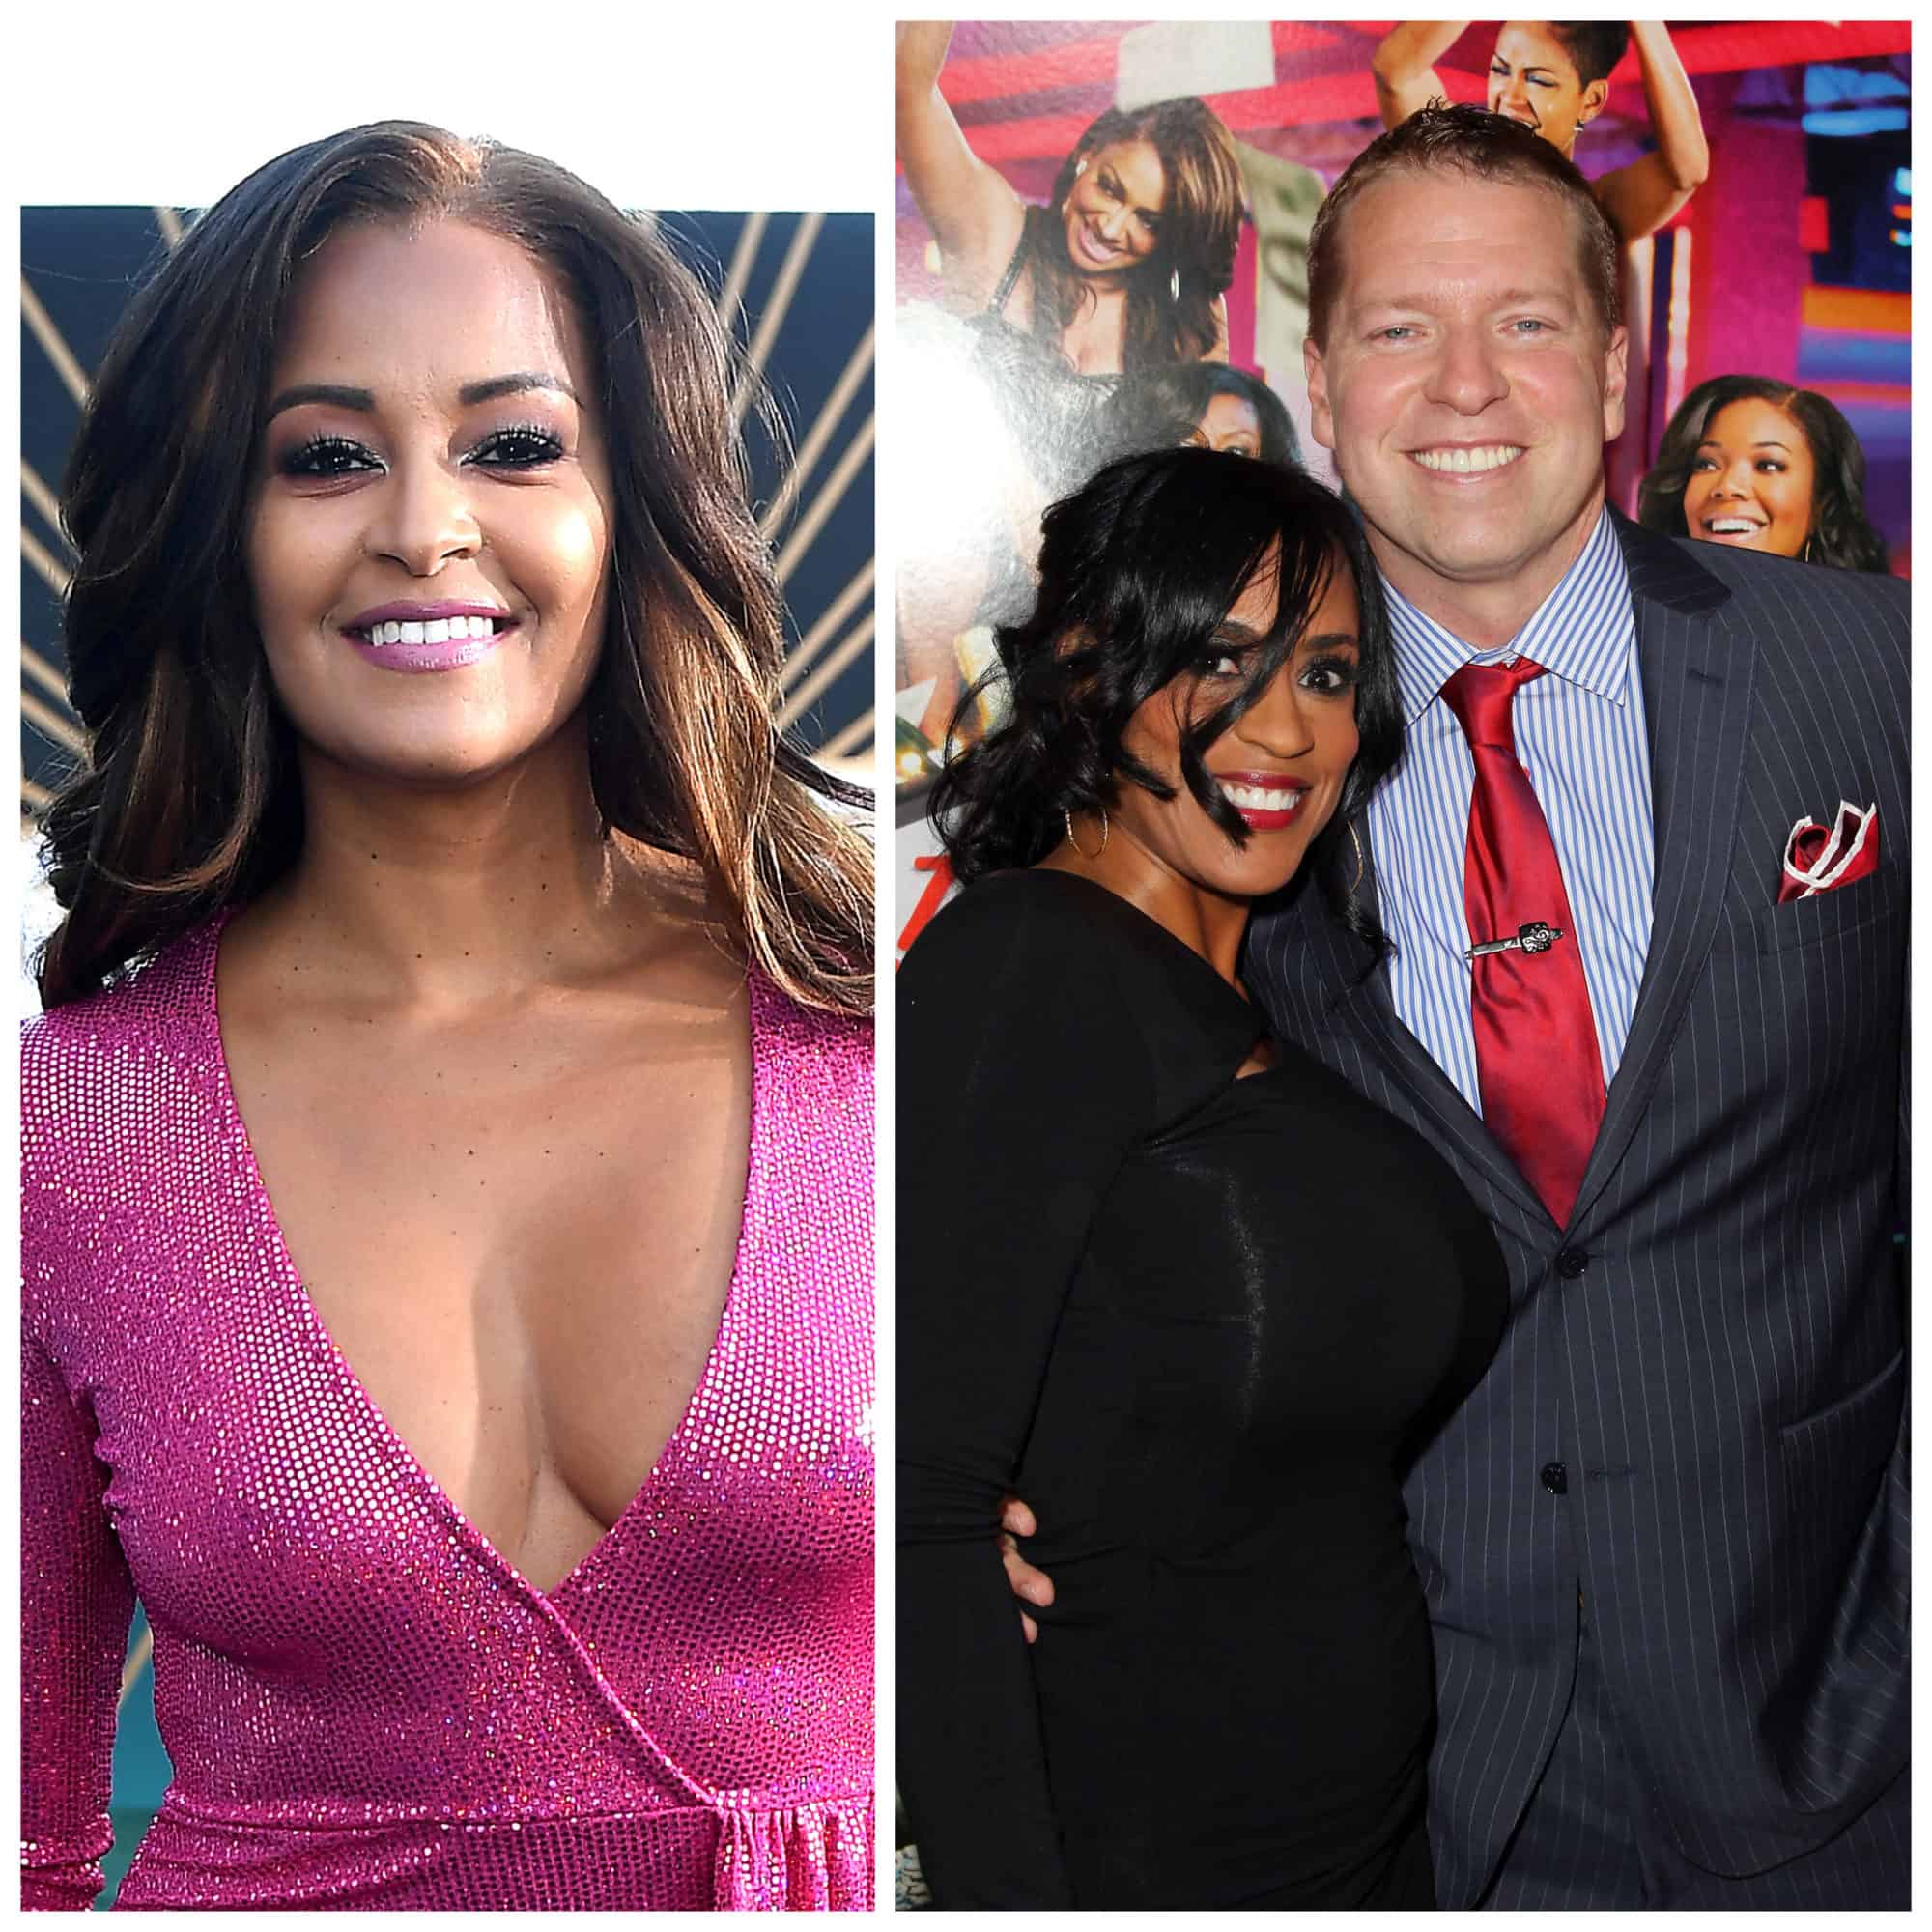 Claudia Jordan Denies Breaking Up Gary Owen’s Marriage, Calls Out Gary’s Wife For Not Addressing Her Privately (Video)